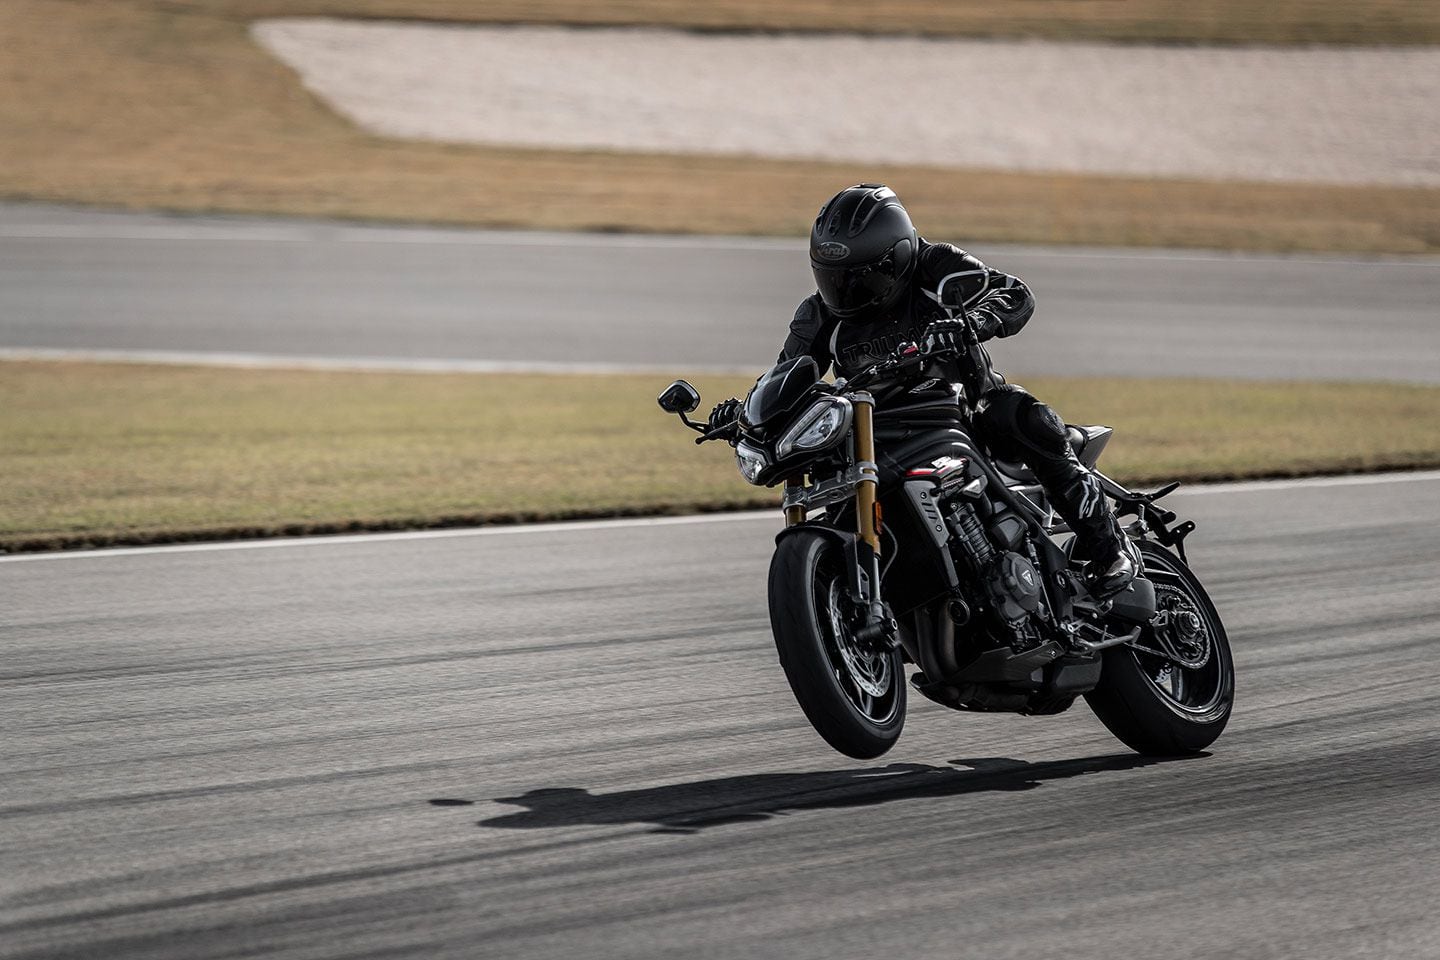 Triumph’s Speed Triple 1200 RS blends power and agility seamlessly. It’s the total package.